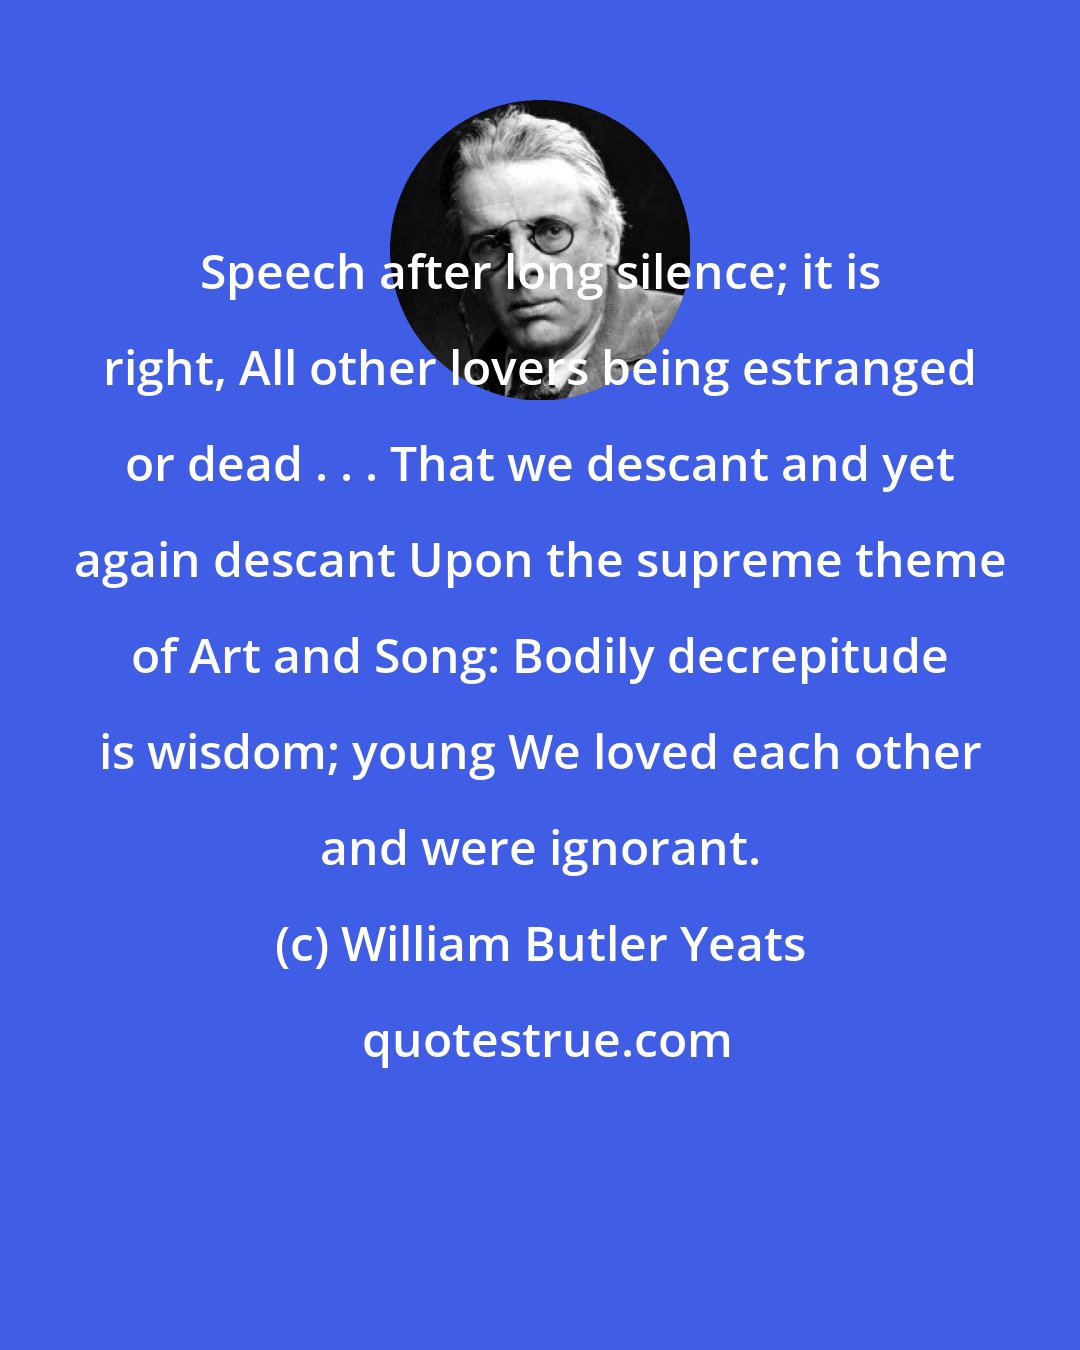 William Butler Yeats: Speech after long silence; it is right, All other lovers being estranged or dead . . . That we descant and yet again descant Upon the supreme theme of Art and Song: Bodily decrepitude is wisdom; young We loved each other and were ignorant.